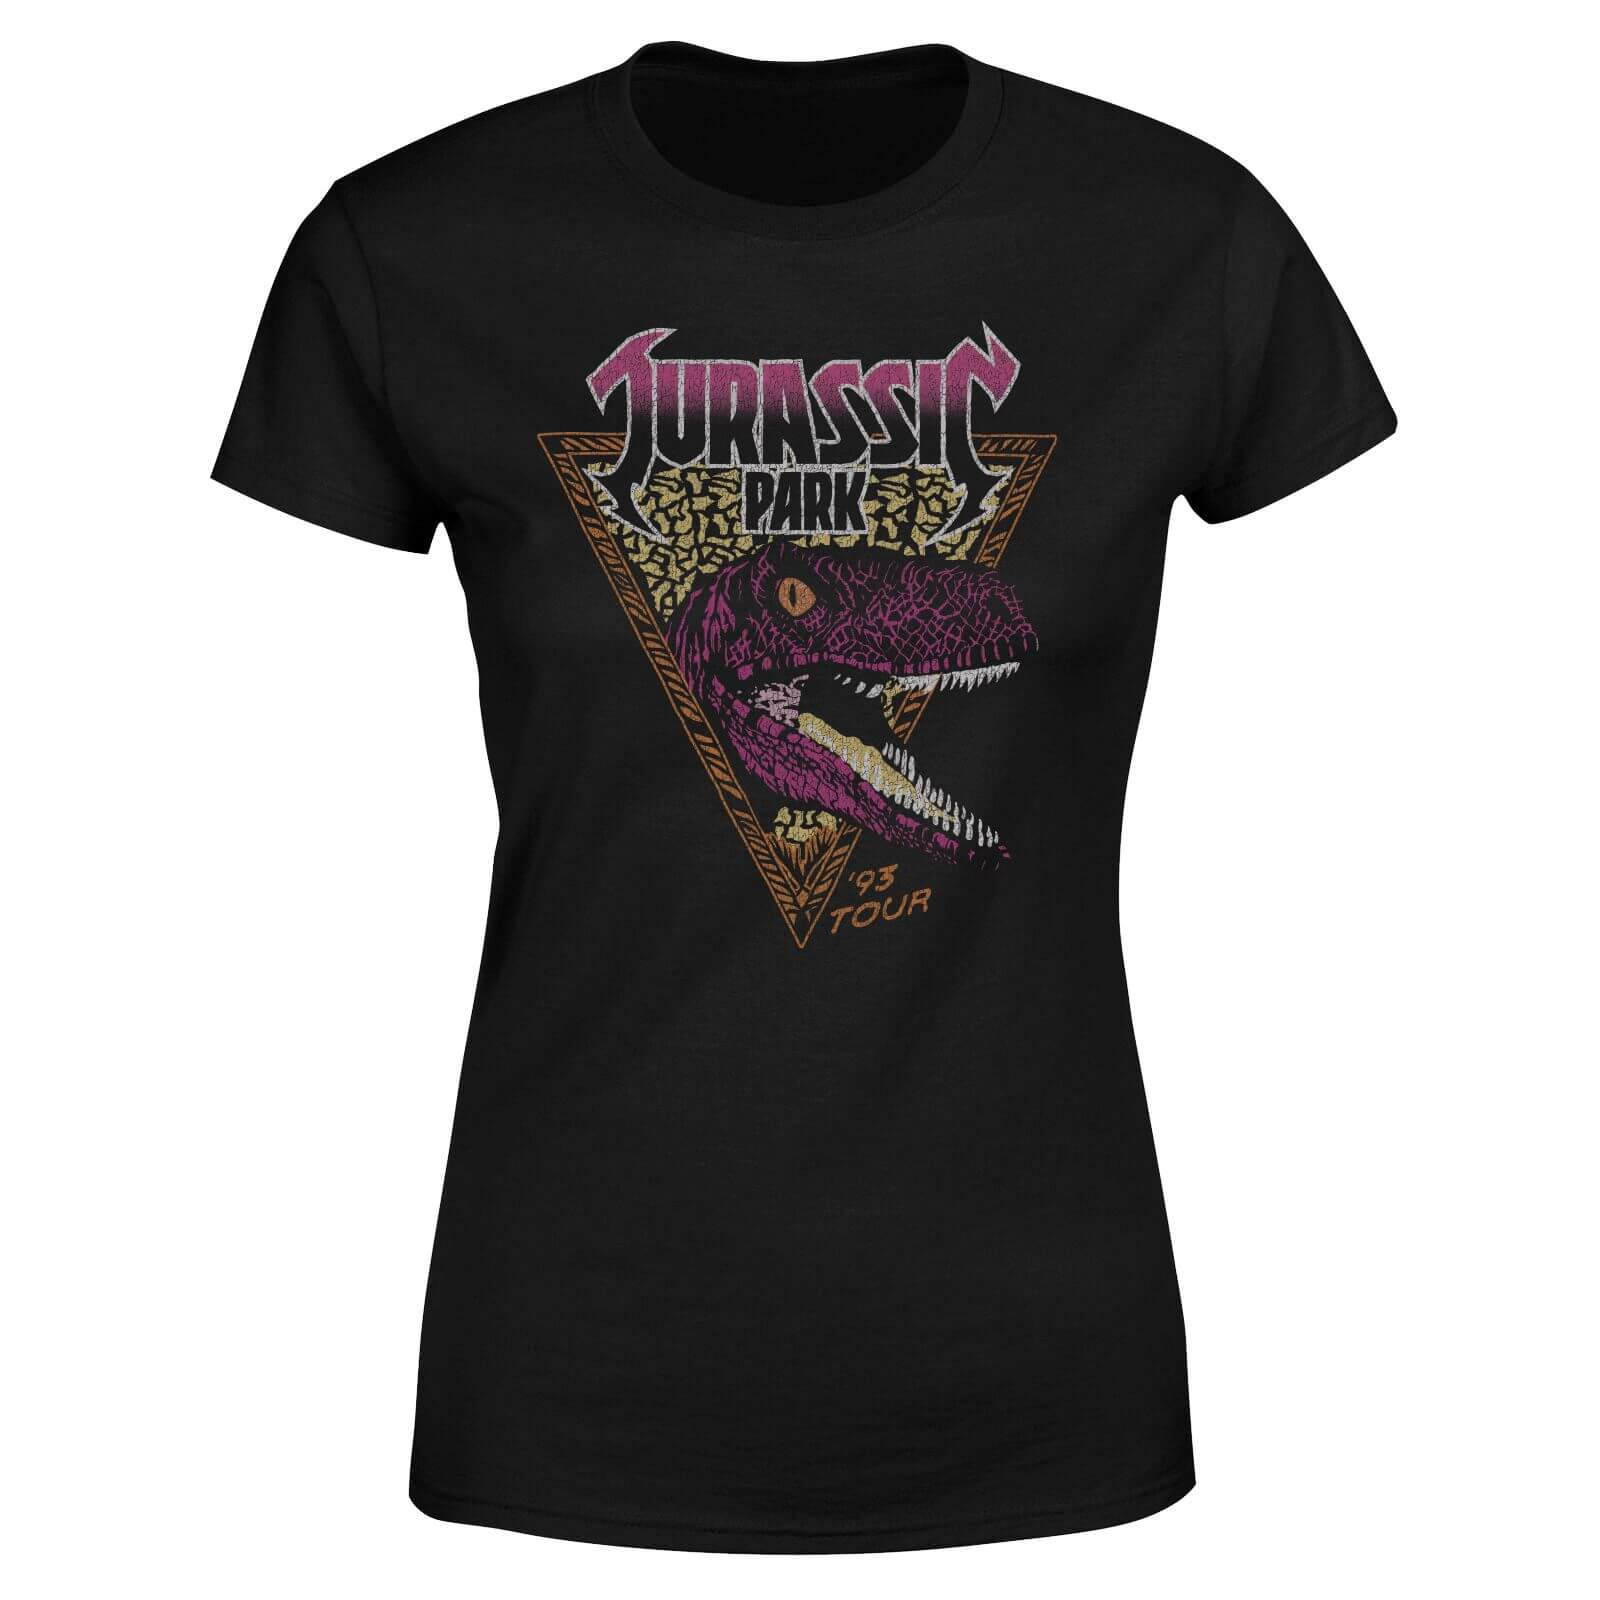 View the best prices for: black jurassic park raptor women’s t-shirt